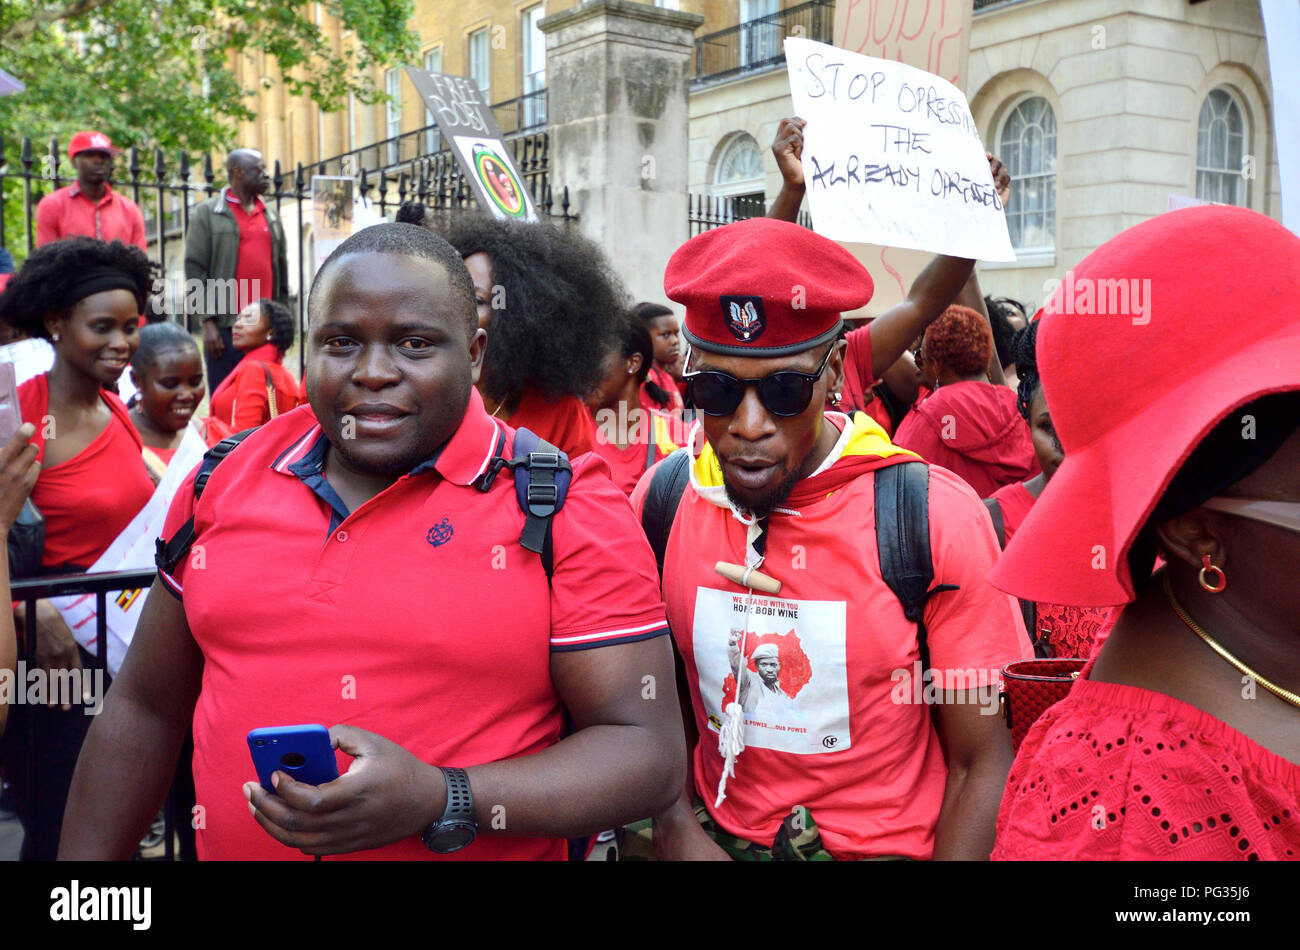 London, 23rd August 2018. Campaigers protest in Whitehall opposite Downing Street against Ugandan President Museveni and in support of Bobi Wine (Robert Kyagulanyi Ssentamu, also known as Bobi Wine, Ugandan politician, musician and actor) who was rearrested in Uganda on charges of treason, moments after the state had withdrawn previous charges of illegal possession of firearms and ammunition. Credit: PjrFoto/Alamy Live News Stock Photo